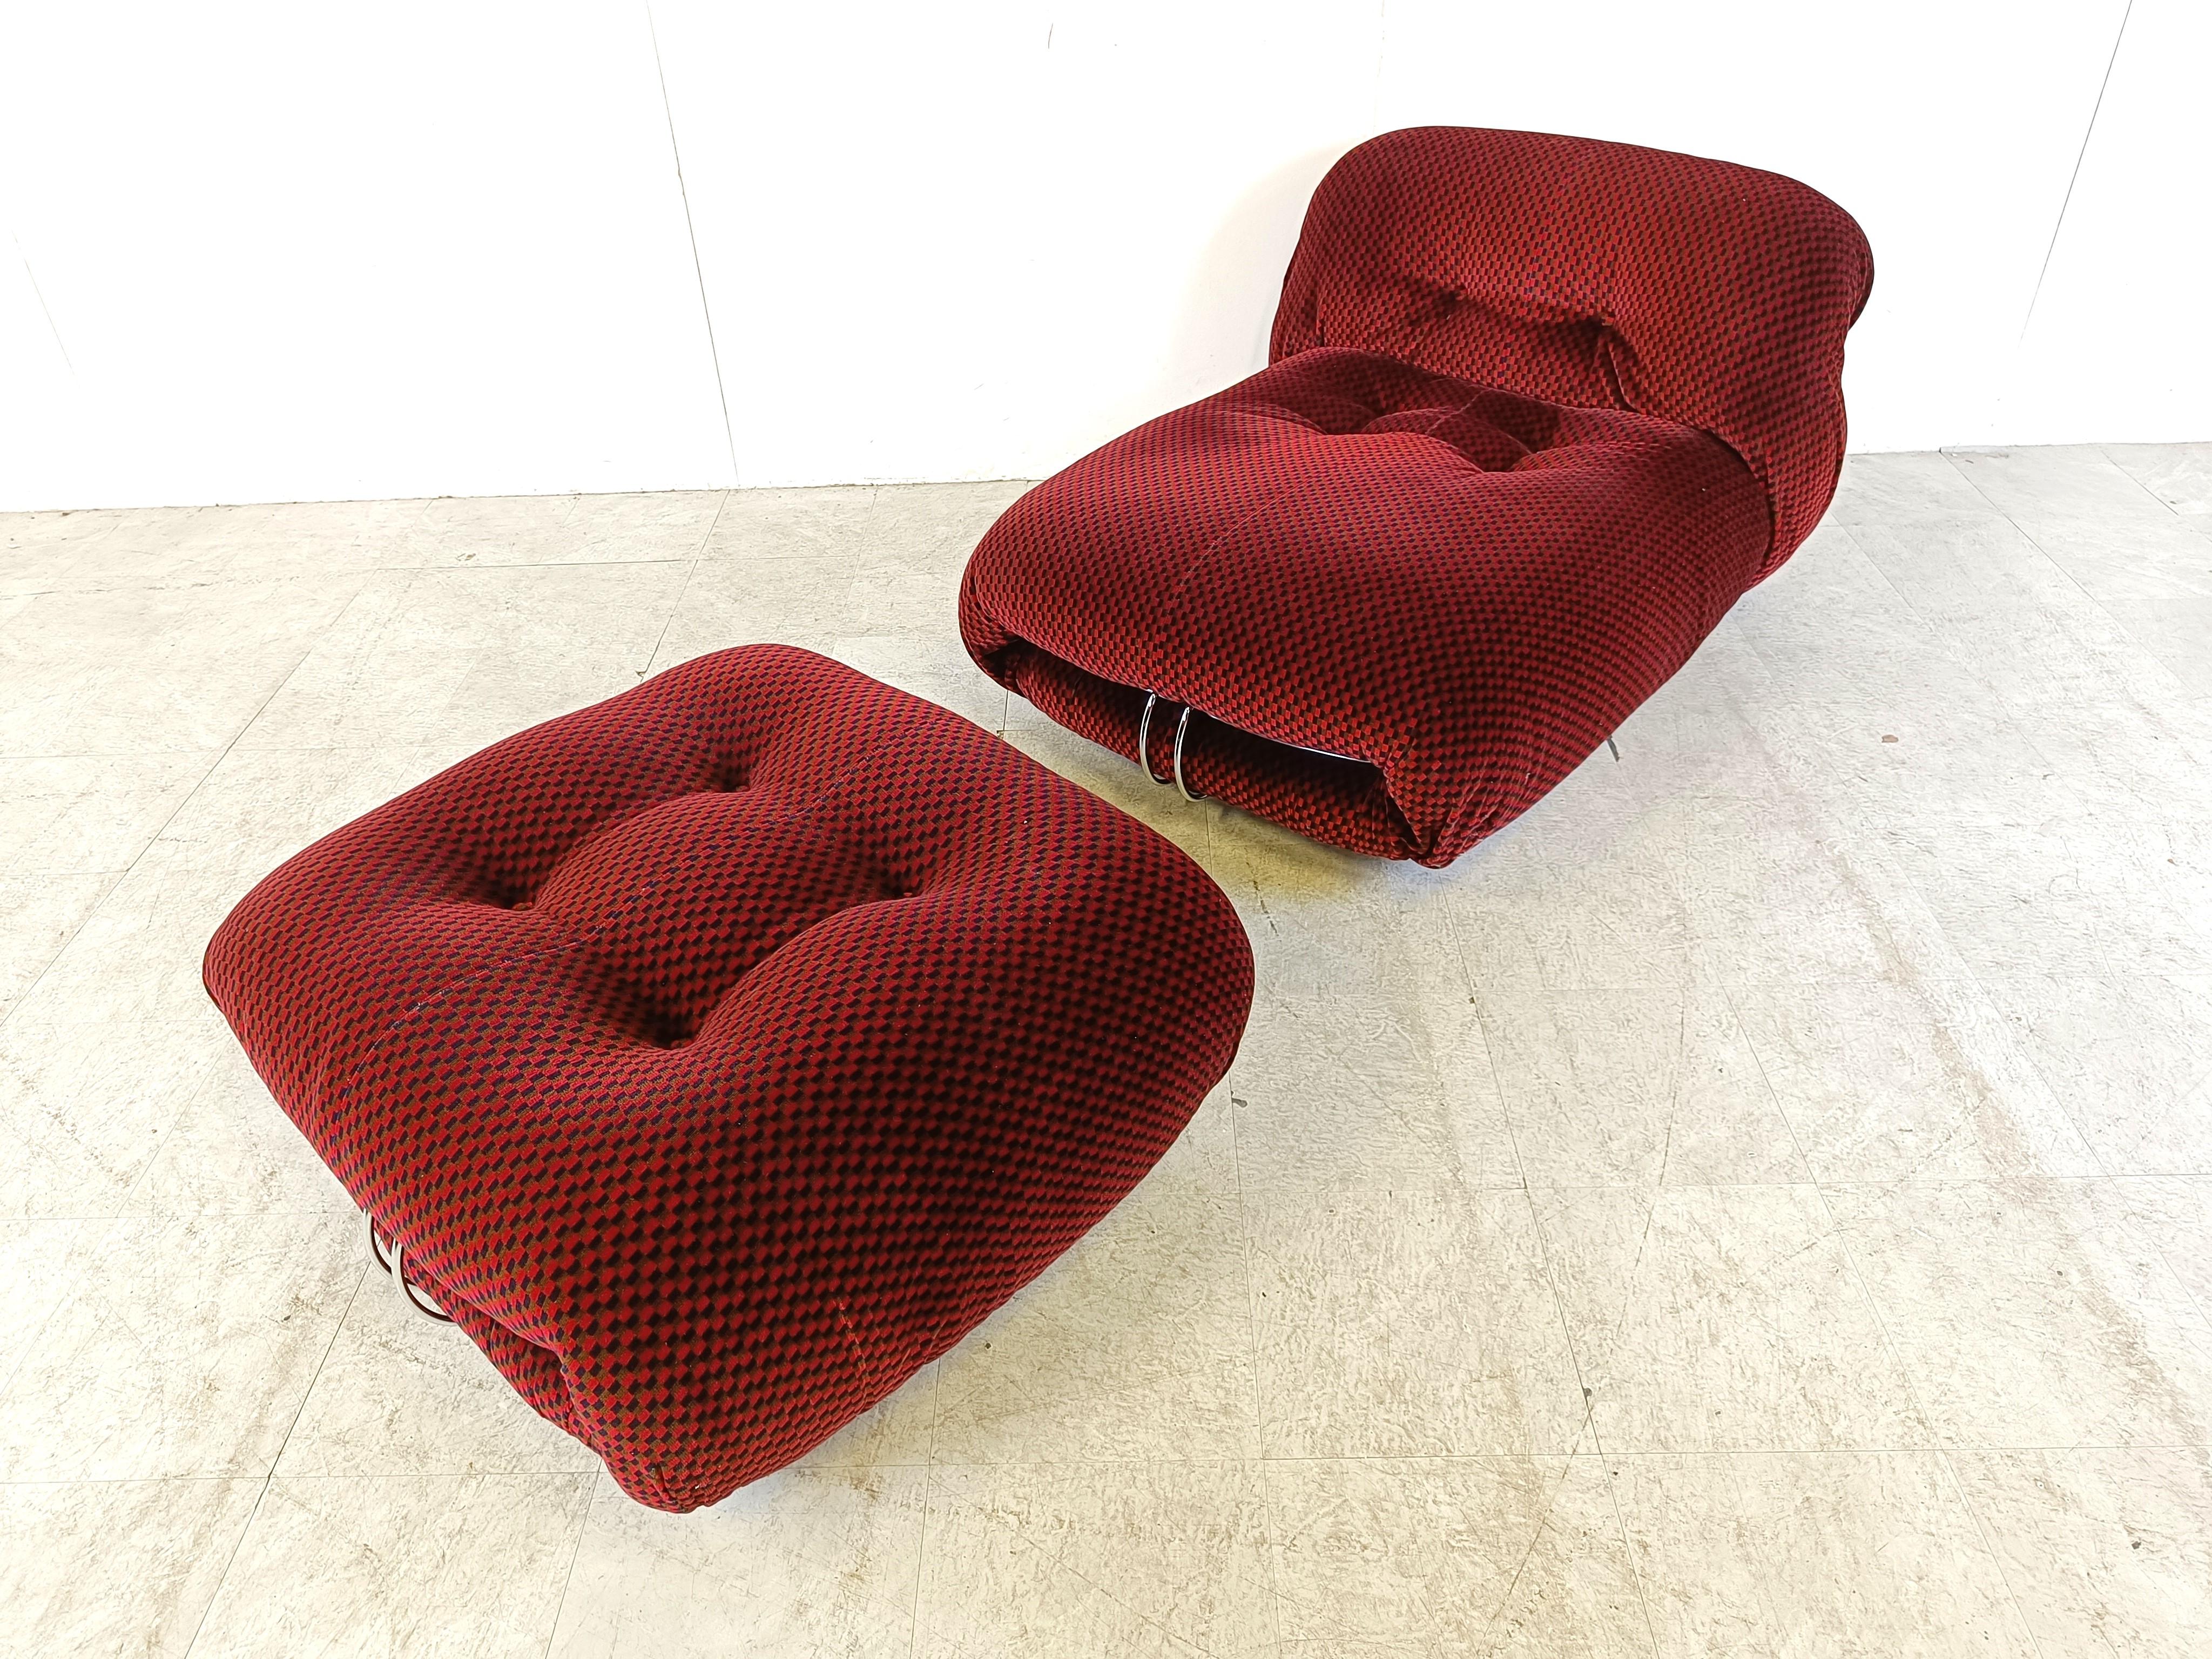 Very rare Soriana lounge chair with ottoman designed in 1969 by Afra & Tobia Scarpa for Cassina.

It still has its intact seventies upholstery.

Beautiful and timeless design with the right vintage vibes.

Very comfortable

Good condition, not